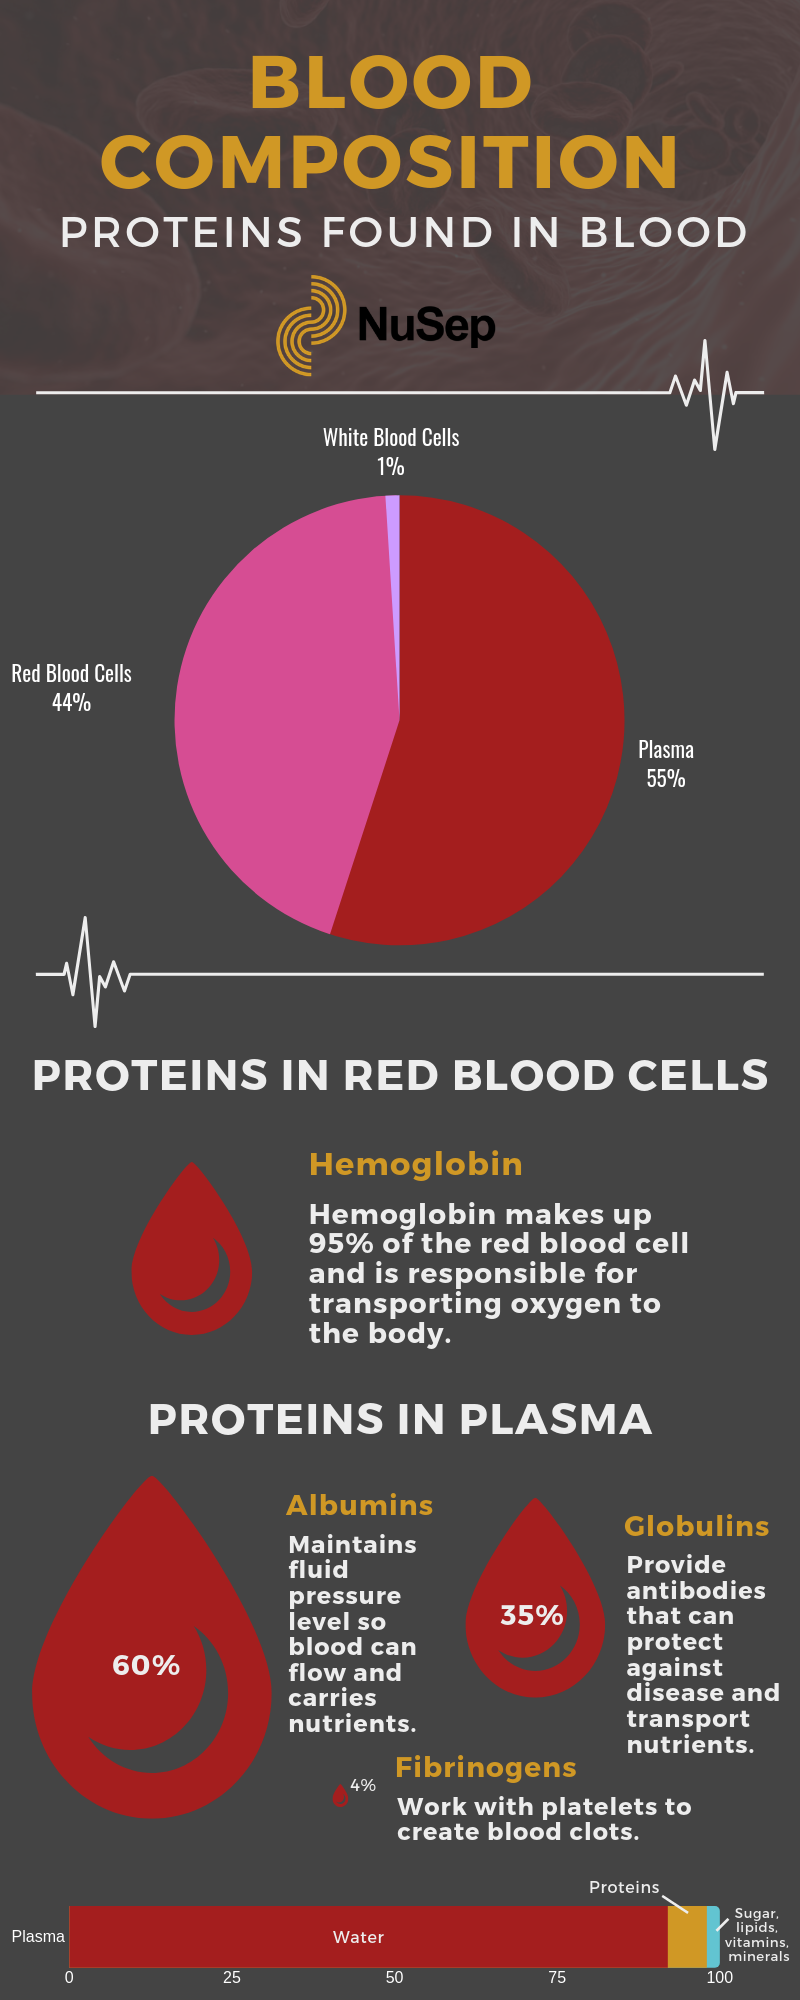 An infographic that describes the protein found in blood